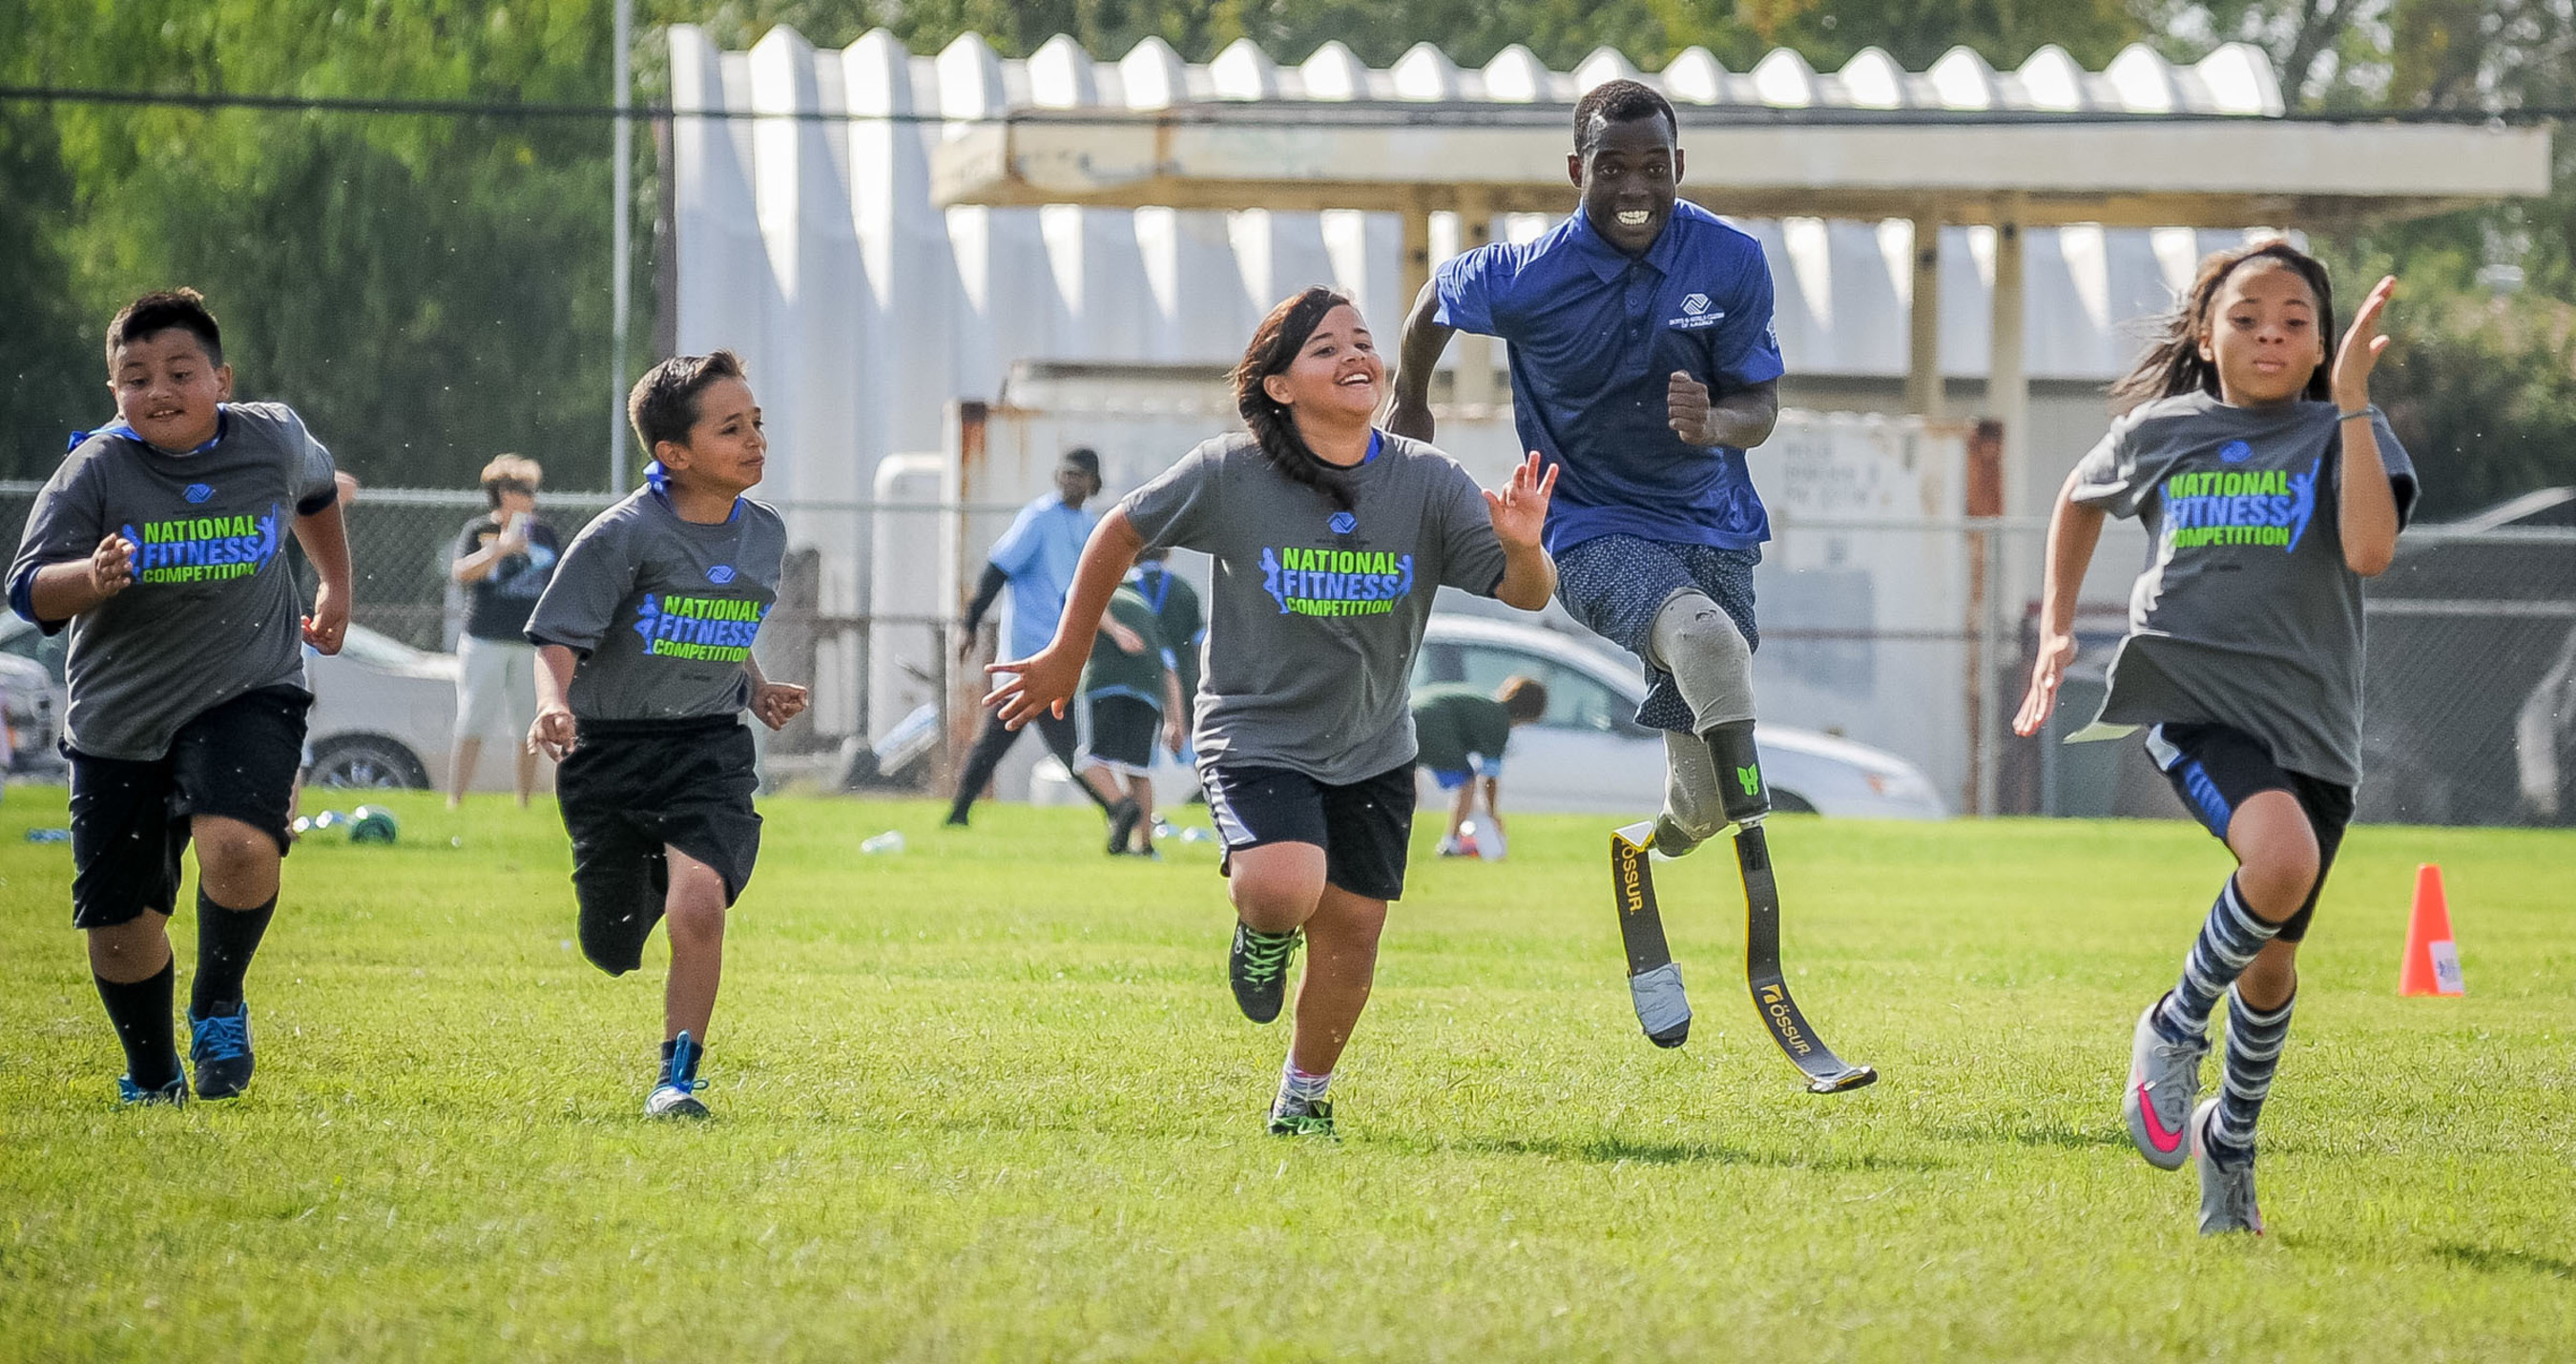 Paralympic athlete Blake Leeper races with Boys & Girls Club kids in Bakersfield, California during Boys & Girls Clubs of America and Nestle's National Fitness Competition.